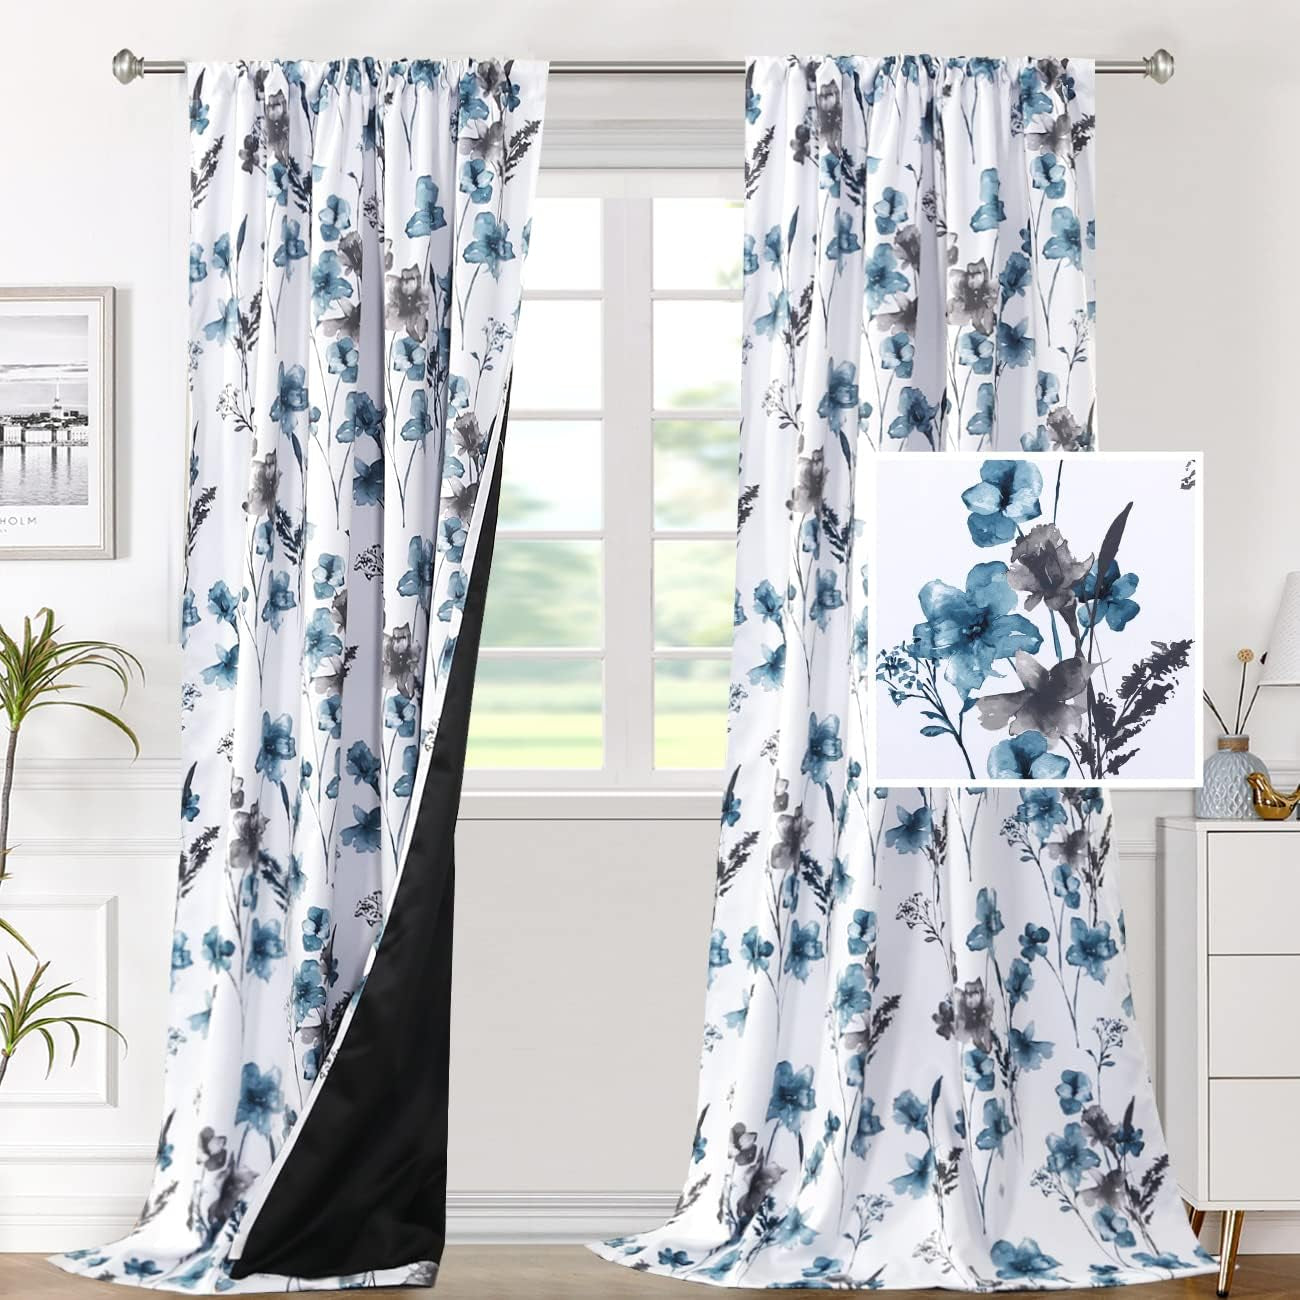 H.VERSAILTEX 100% Blackout Curtains for Bedroom Cattleya Floral Printed Drapes 84 Inches Long Leah Floral Pattern Full Light Blocking Drapes with Black Liner Rod Pocket 2 Panels, Navy/Taupe  H.VERSAILTEX Grey/Blue 52"W X 96"L 